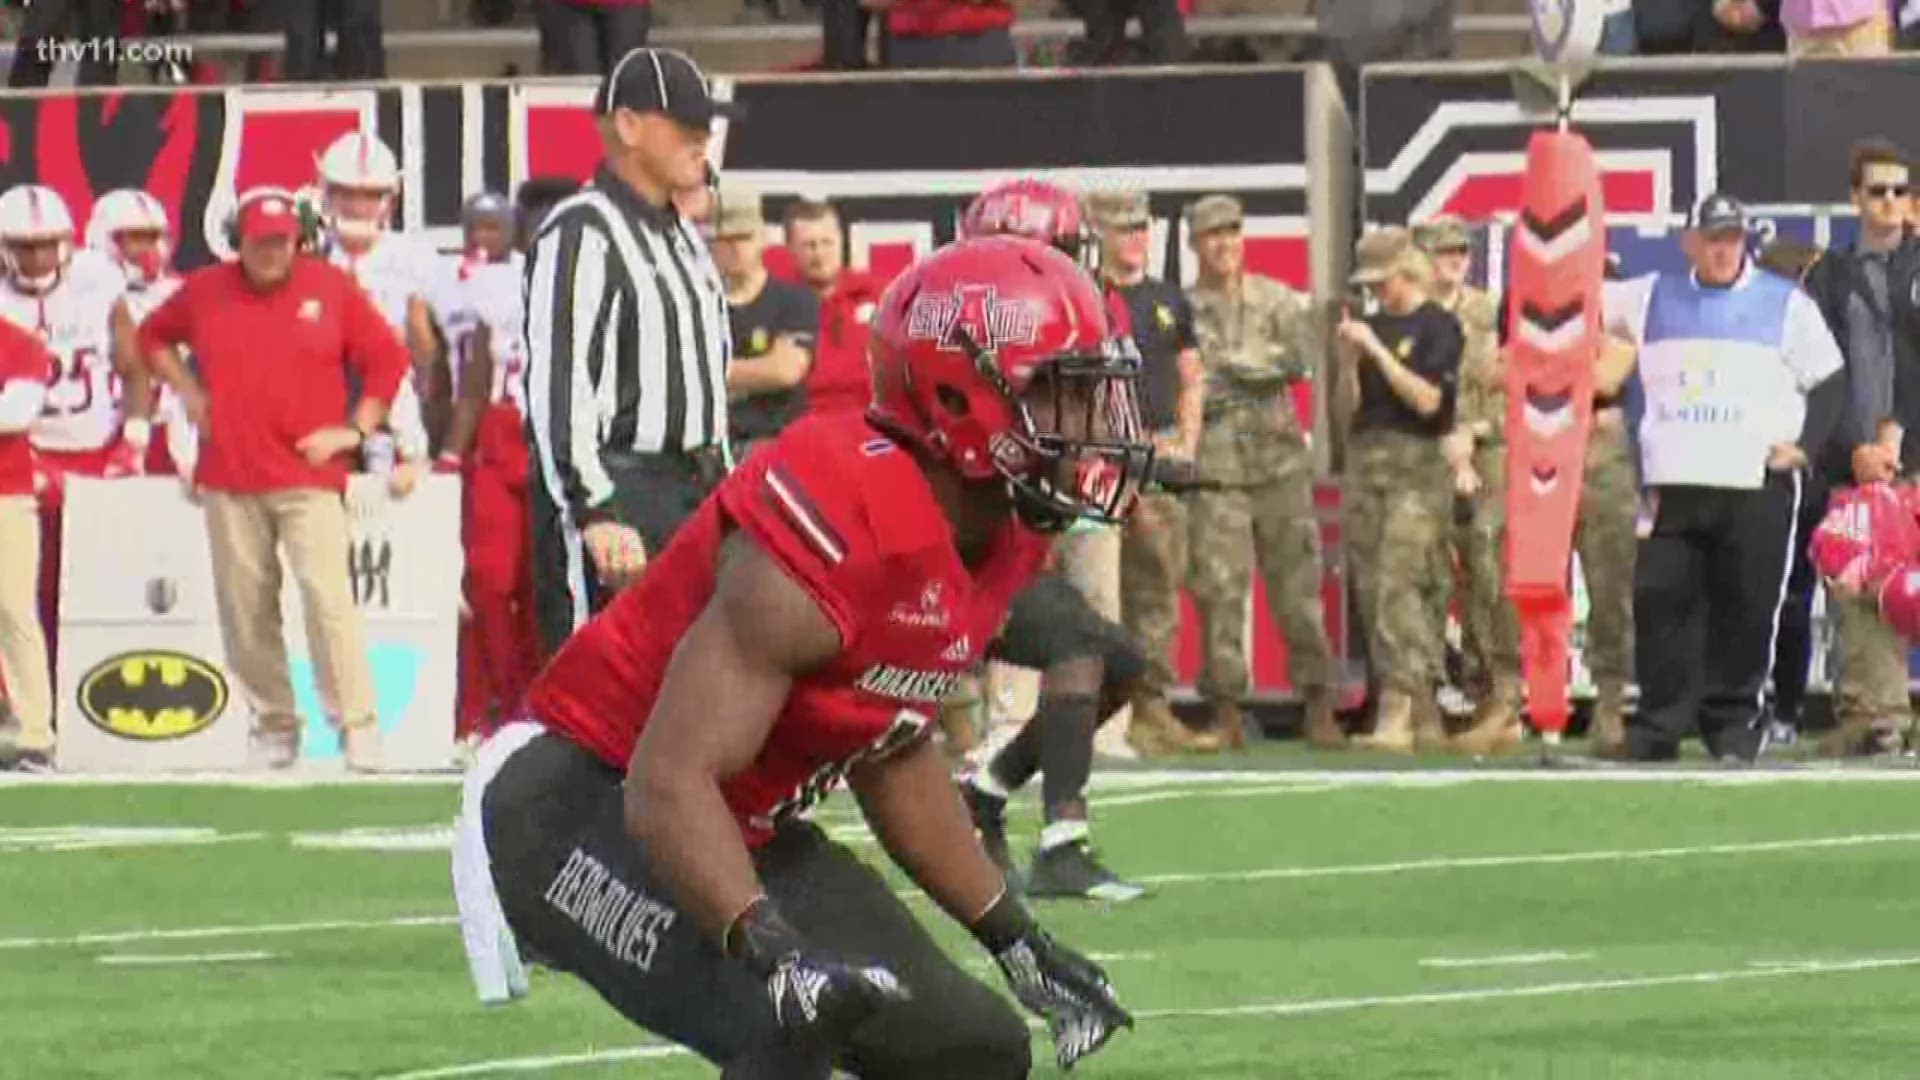 The former Red Wolves cornerback joins the Razorback as a graduate transfer after missing his senior season after tearing his ACL on September 14.